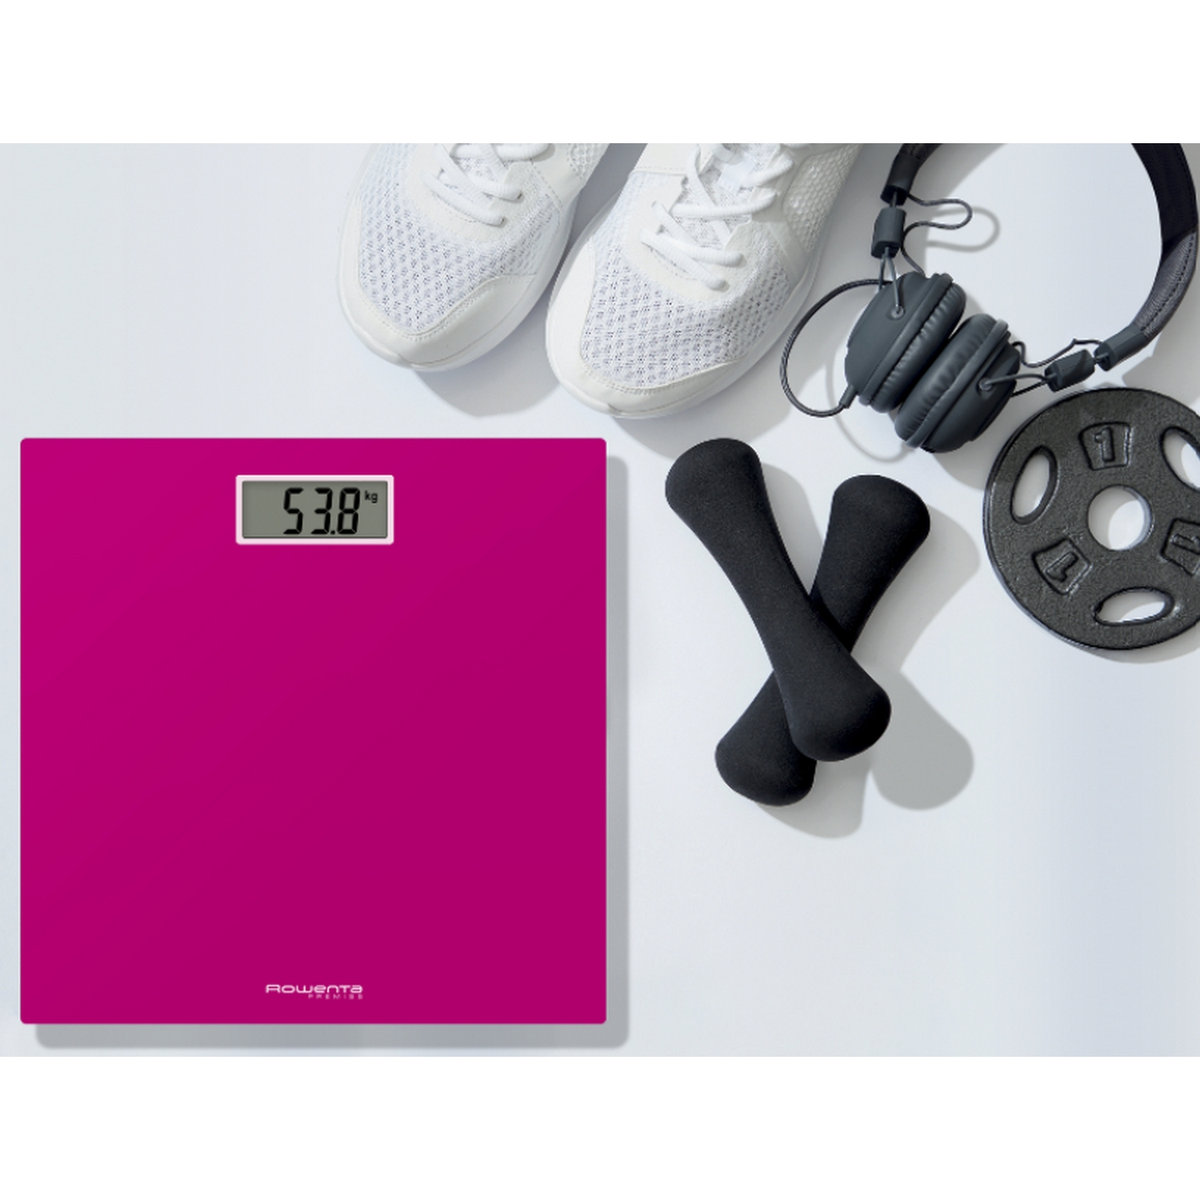 ROWENTA BS1403 Personal scale